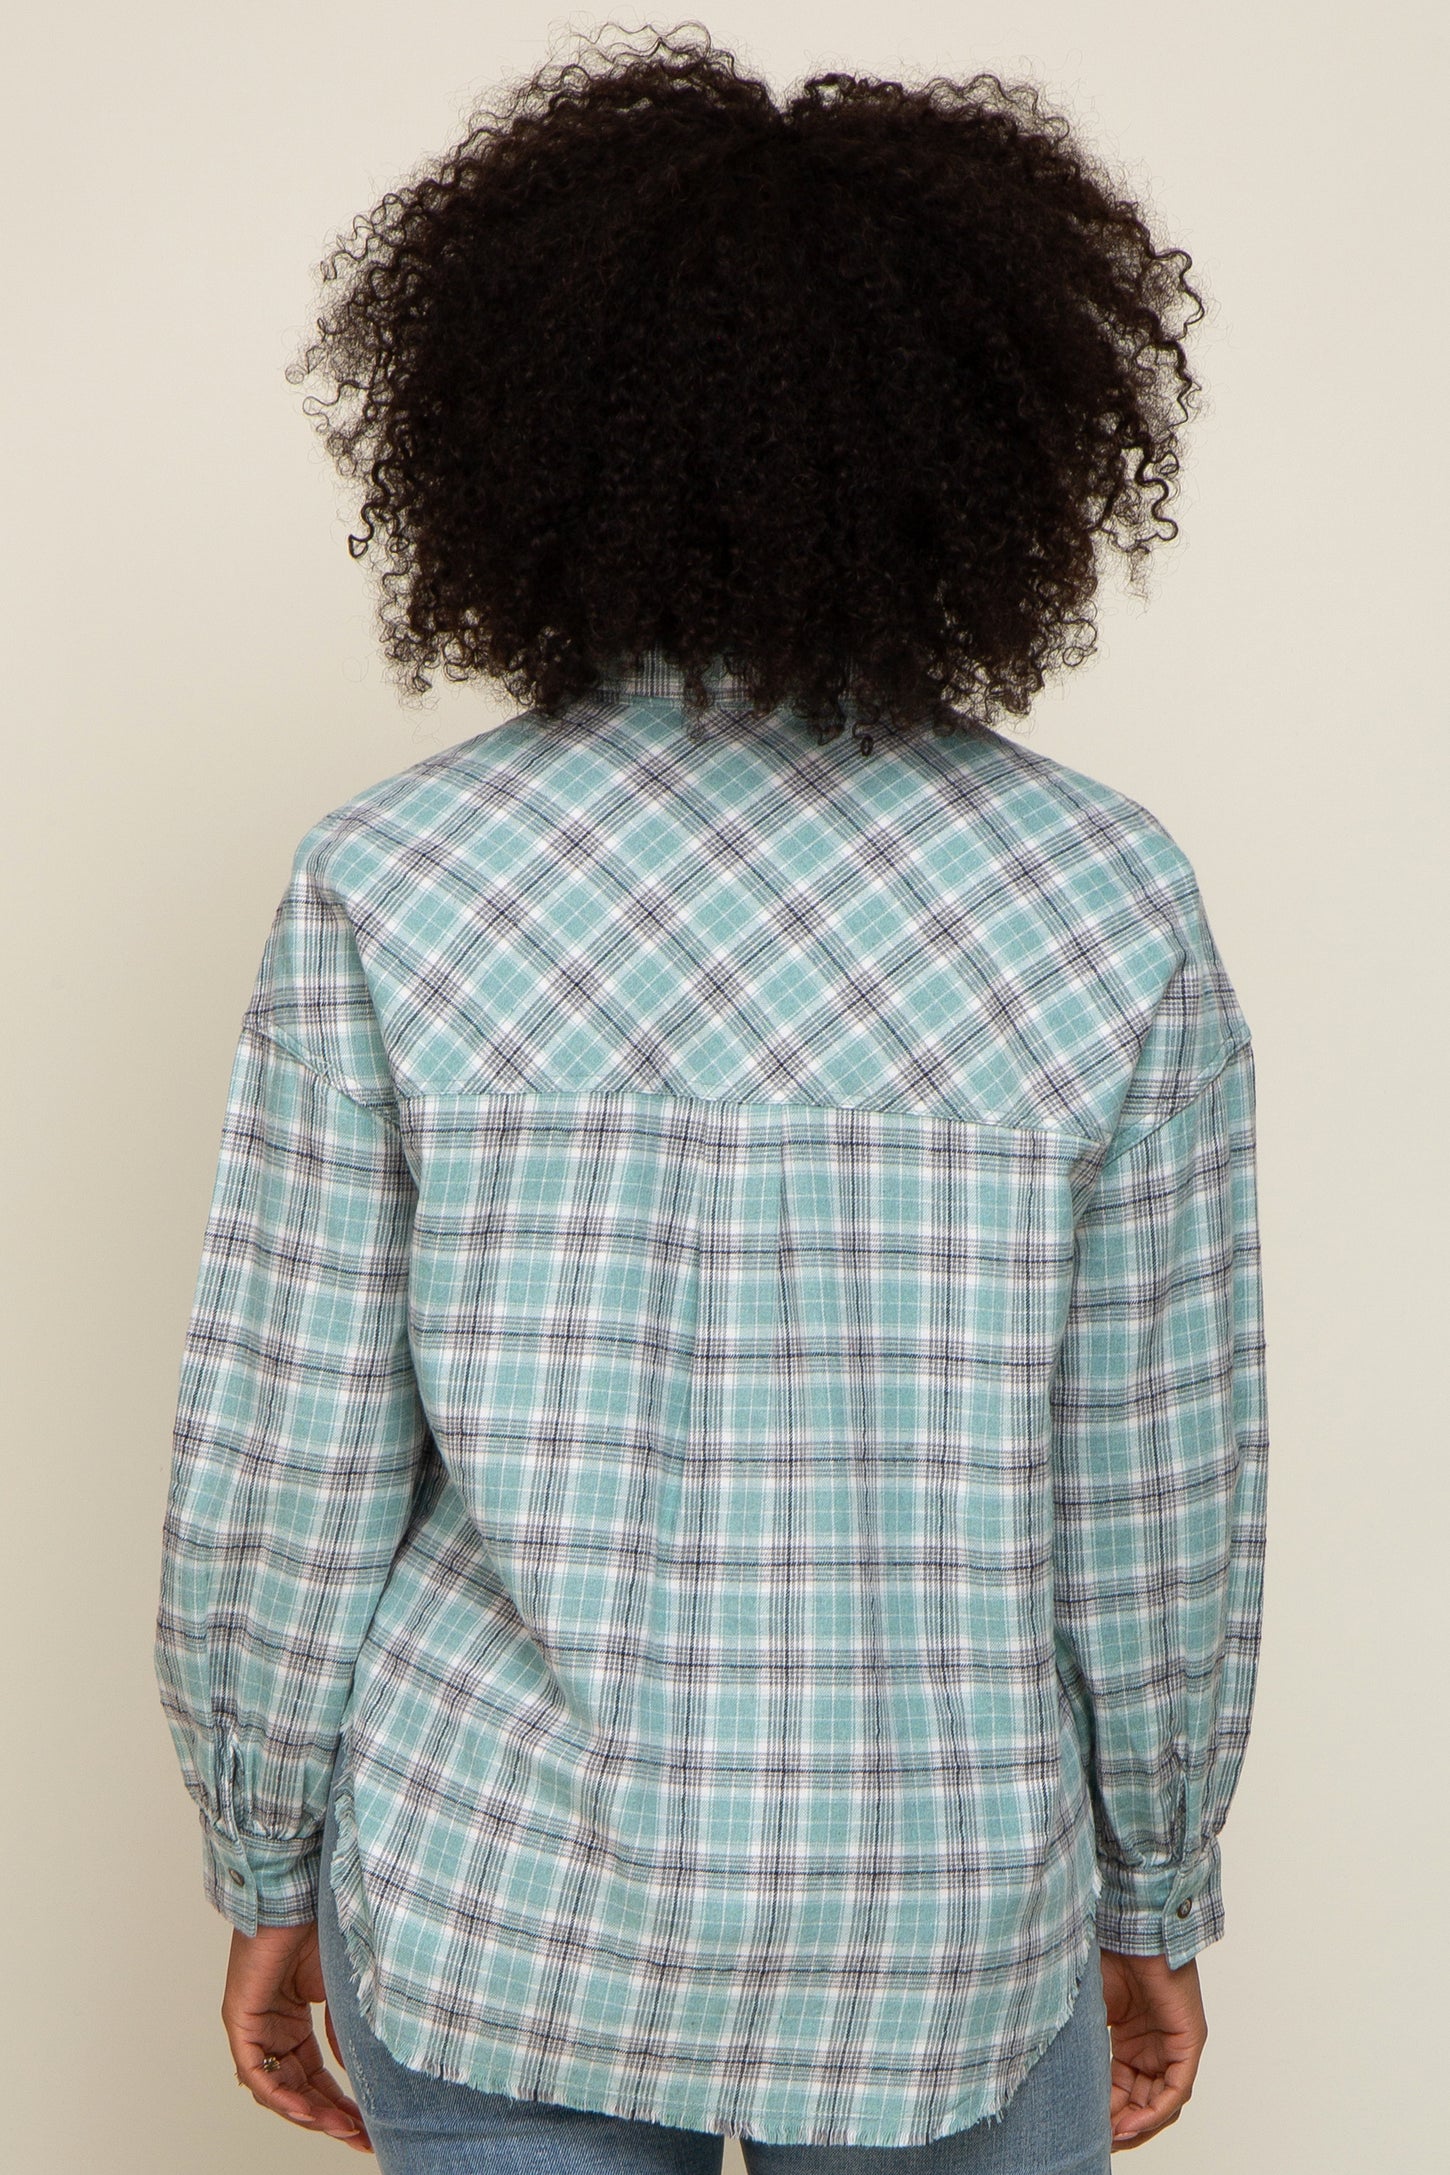 Mint Green Plaid Button Up Raw Edge Flannel Top